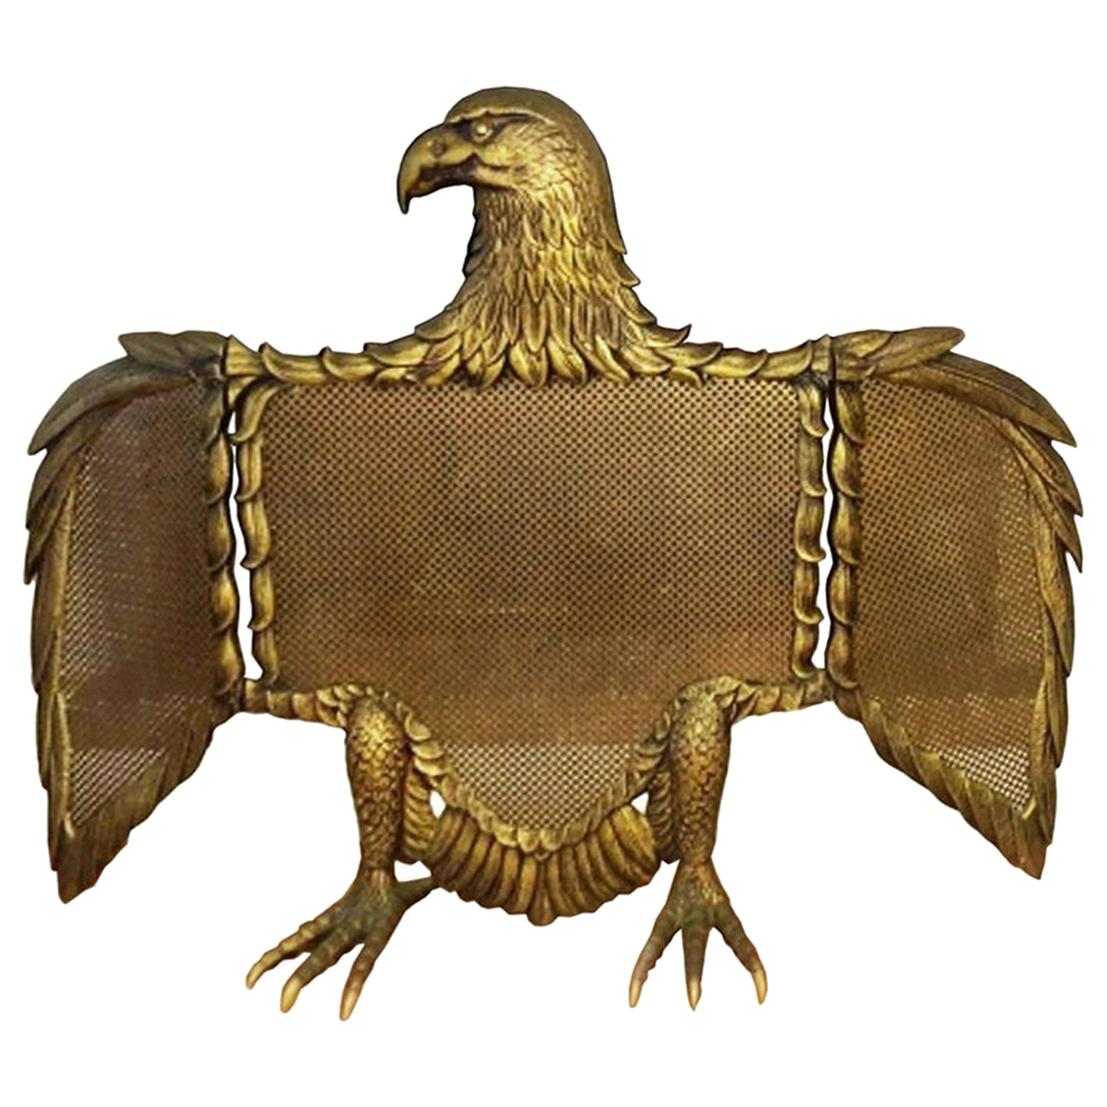 Fire Screen Bronze or Brass Eagle-Sparks, Spain, Early 20th Century